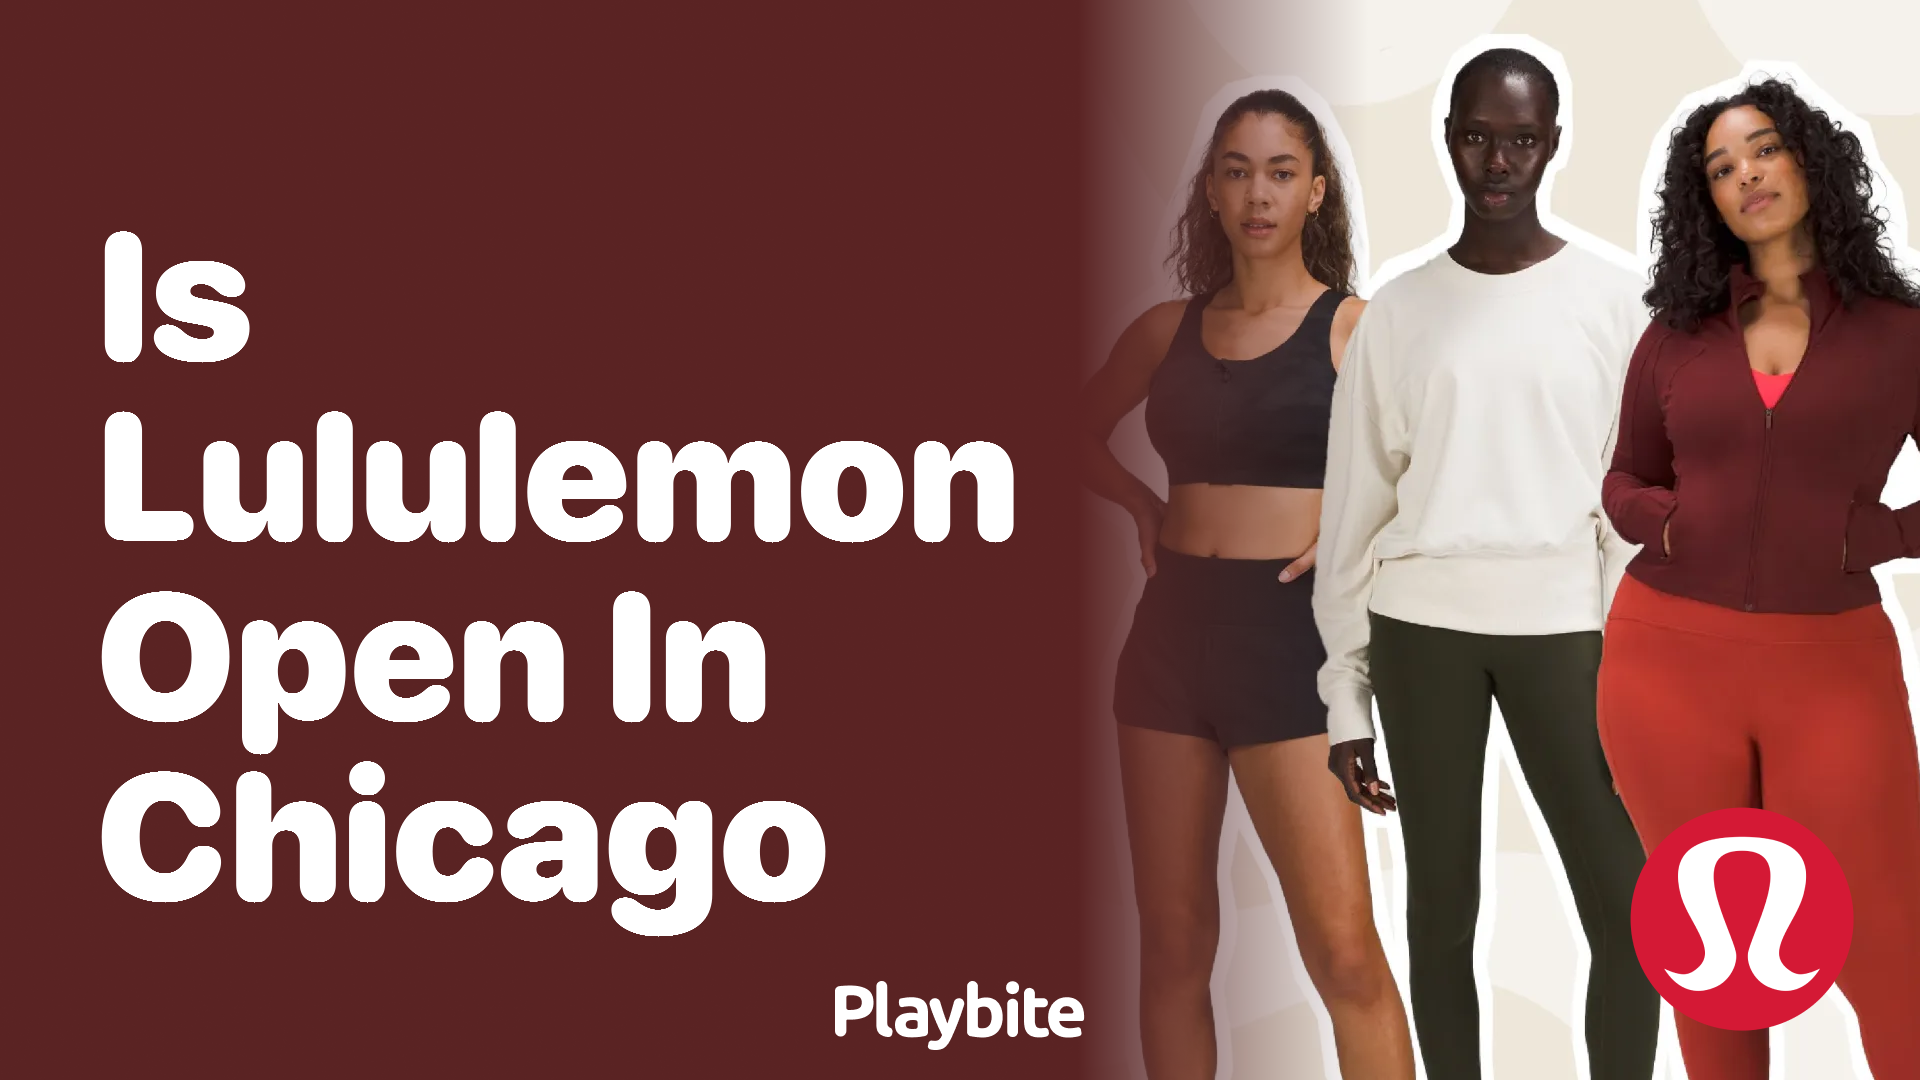 Is Lululemon Membership Free? Find Out Here! - Playbite